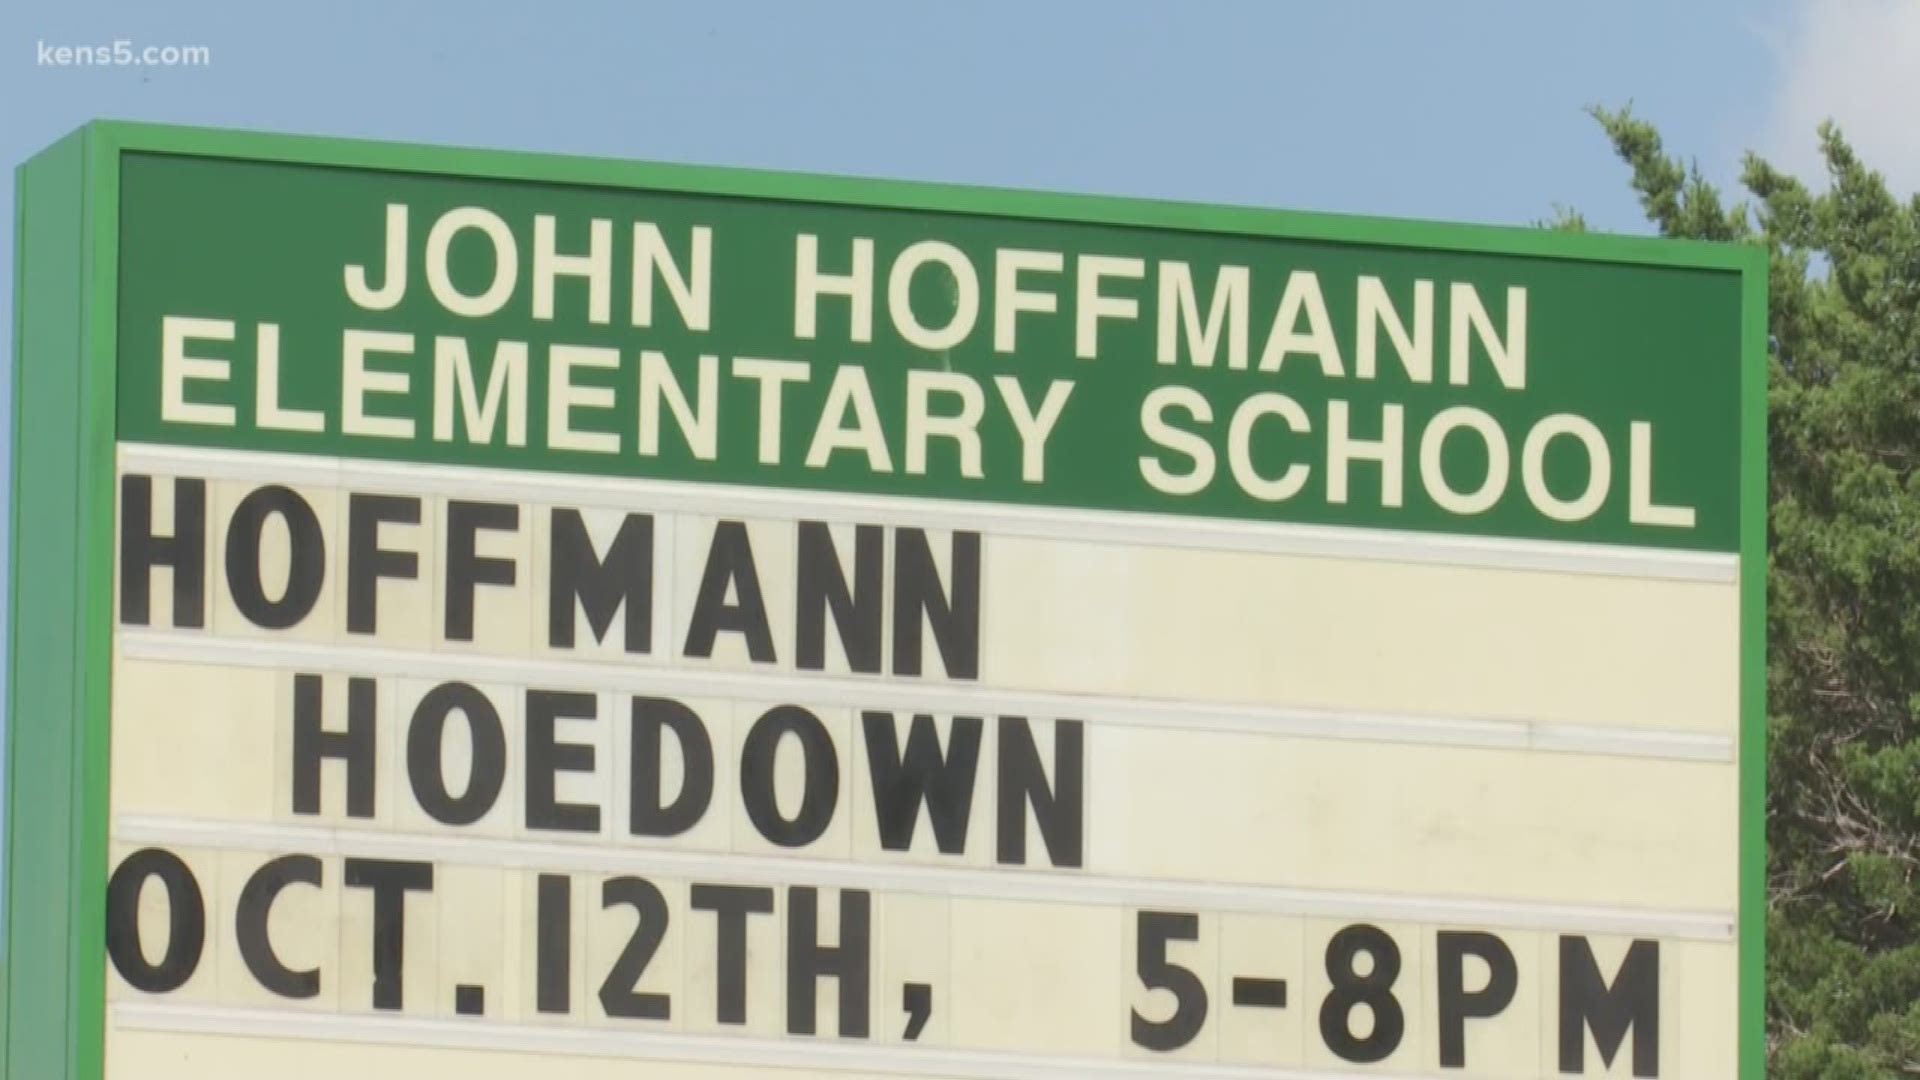 A mother whose son goes to Hoffmann Elementary says a man threatened to shoot up the school. Now parents are concerned about their kids, especially on election day.